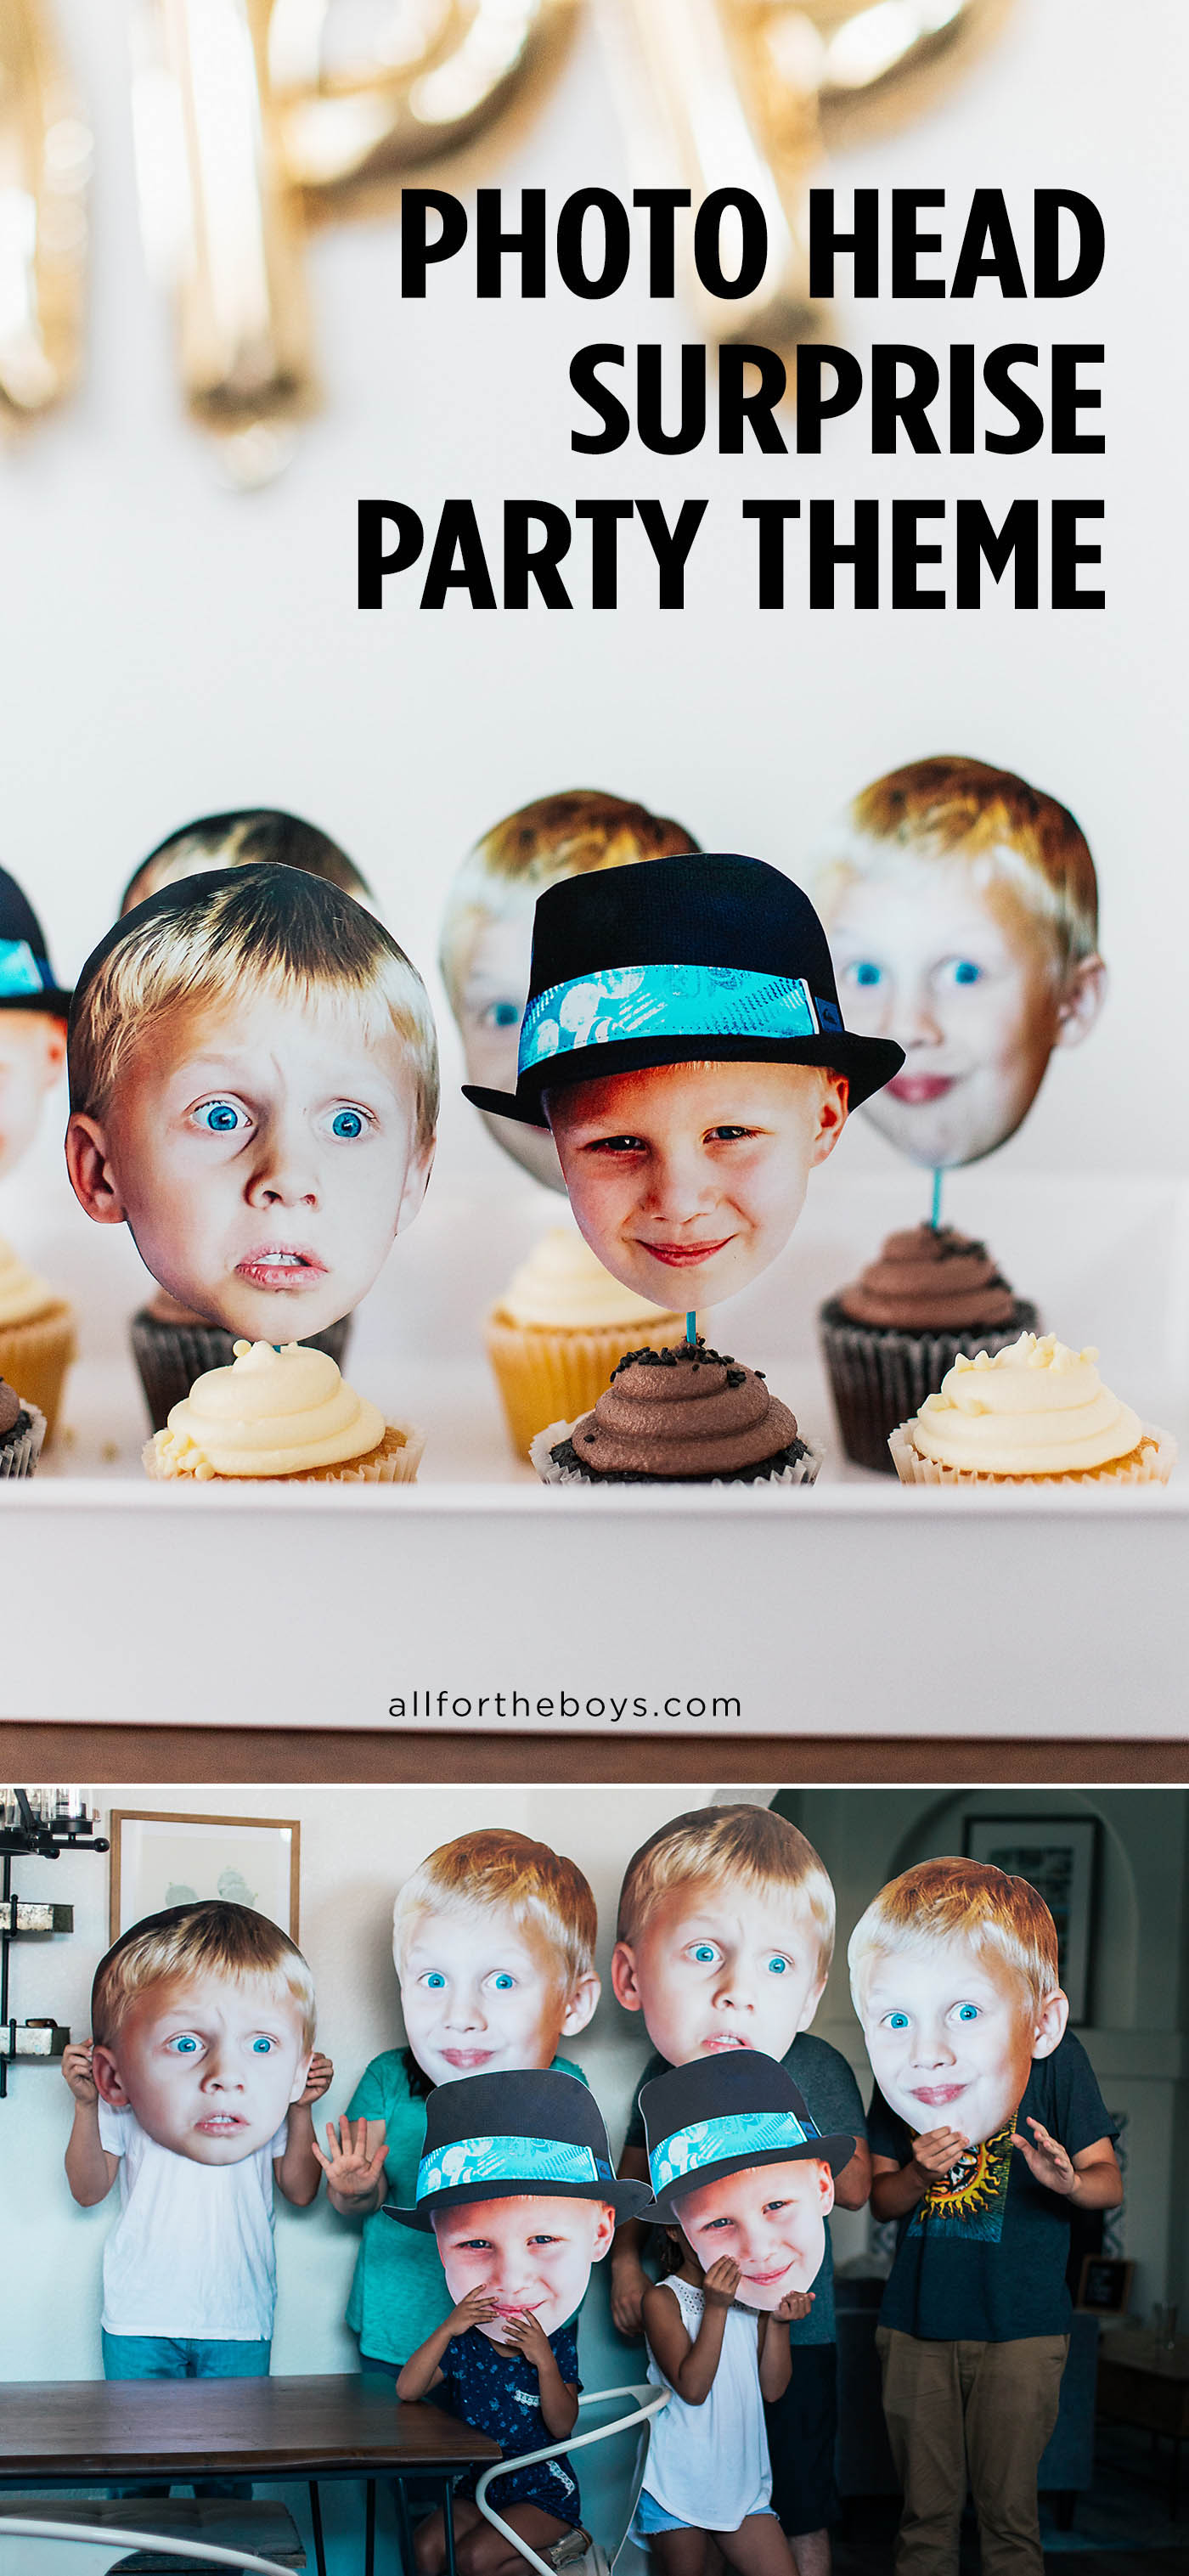 LOVE this photo head surprise party theme! Perfect for graduation, retirement, and anniversaries too!